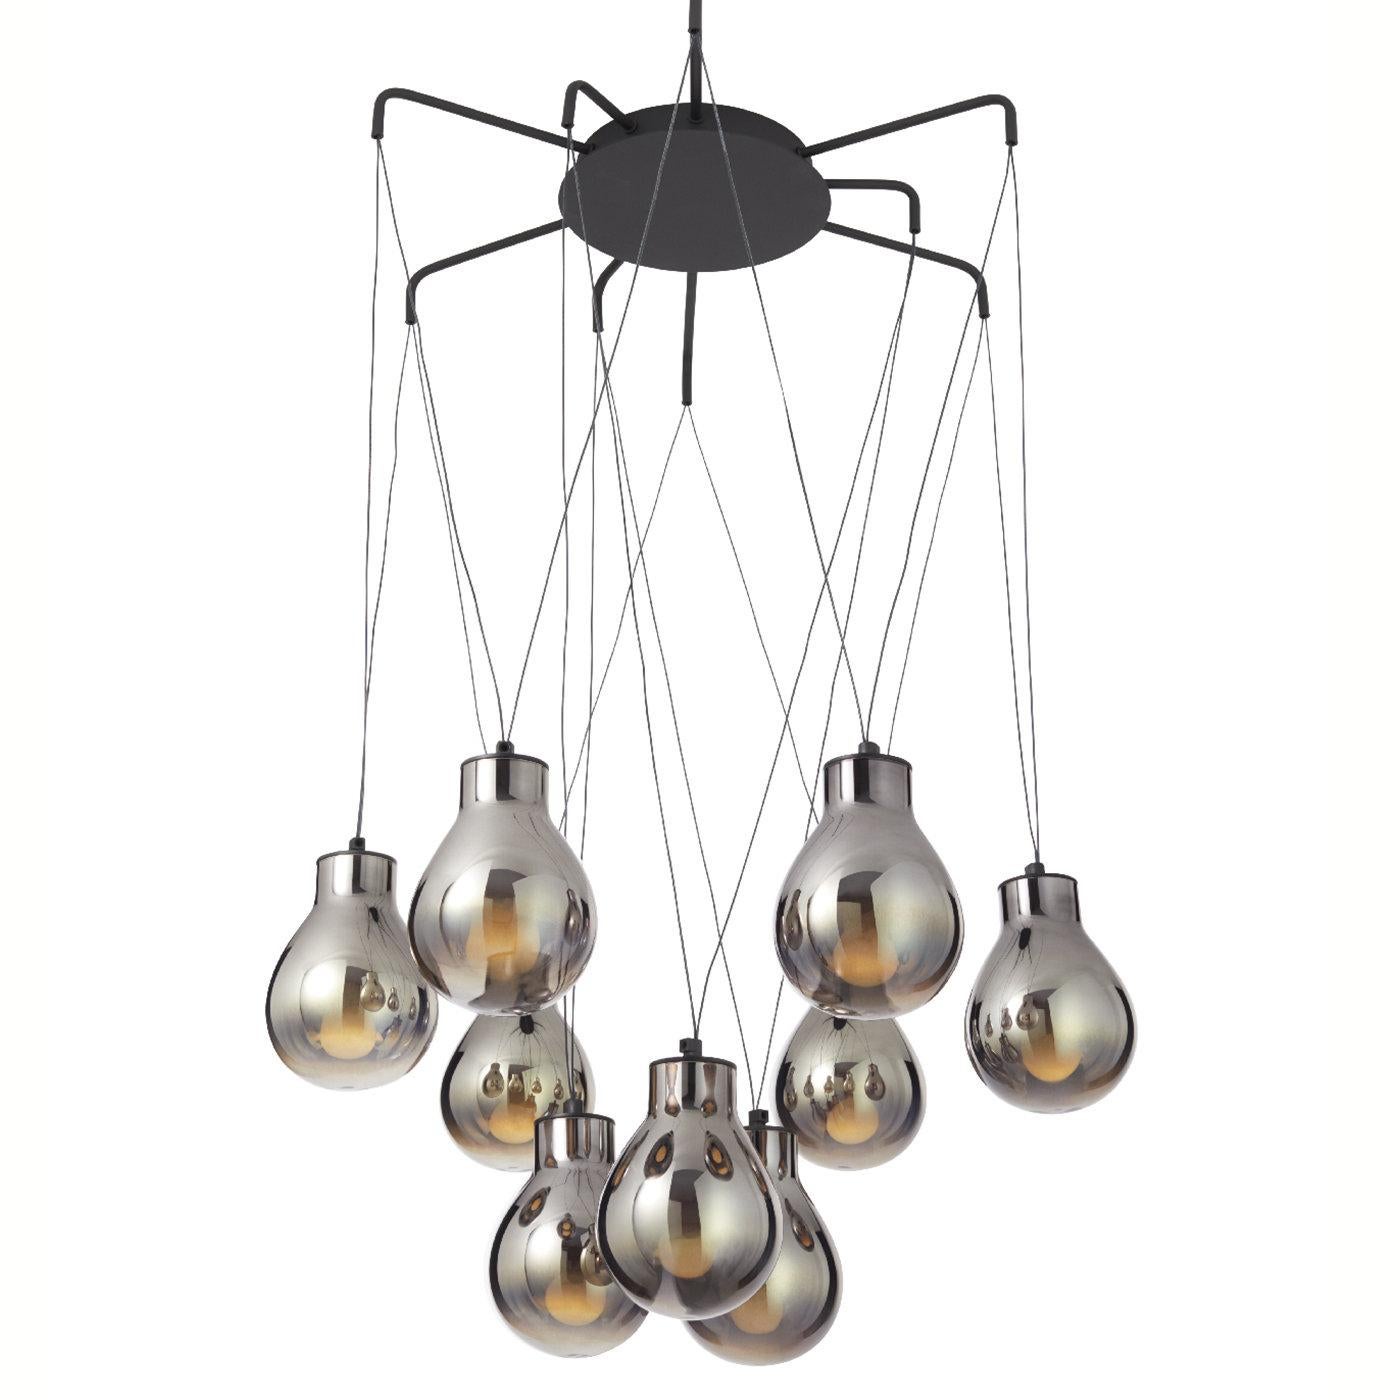 Like raindrops dancing through an autumn sky, this magnificent chandelier features nine spectacular bulbs handcrafted of polished and mirrored glass, enhanced with a warm and smokey red hue. Suspended on V-shaped threads, it features a matte black